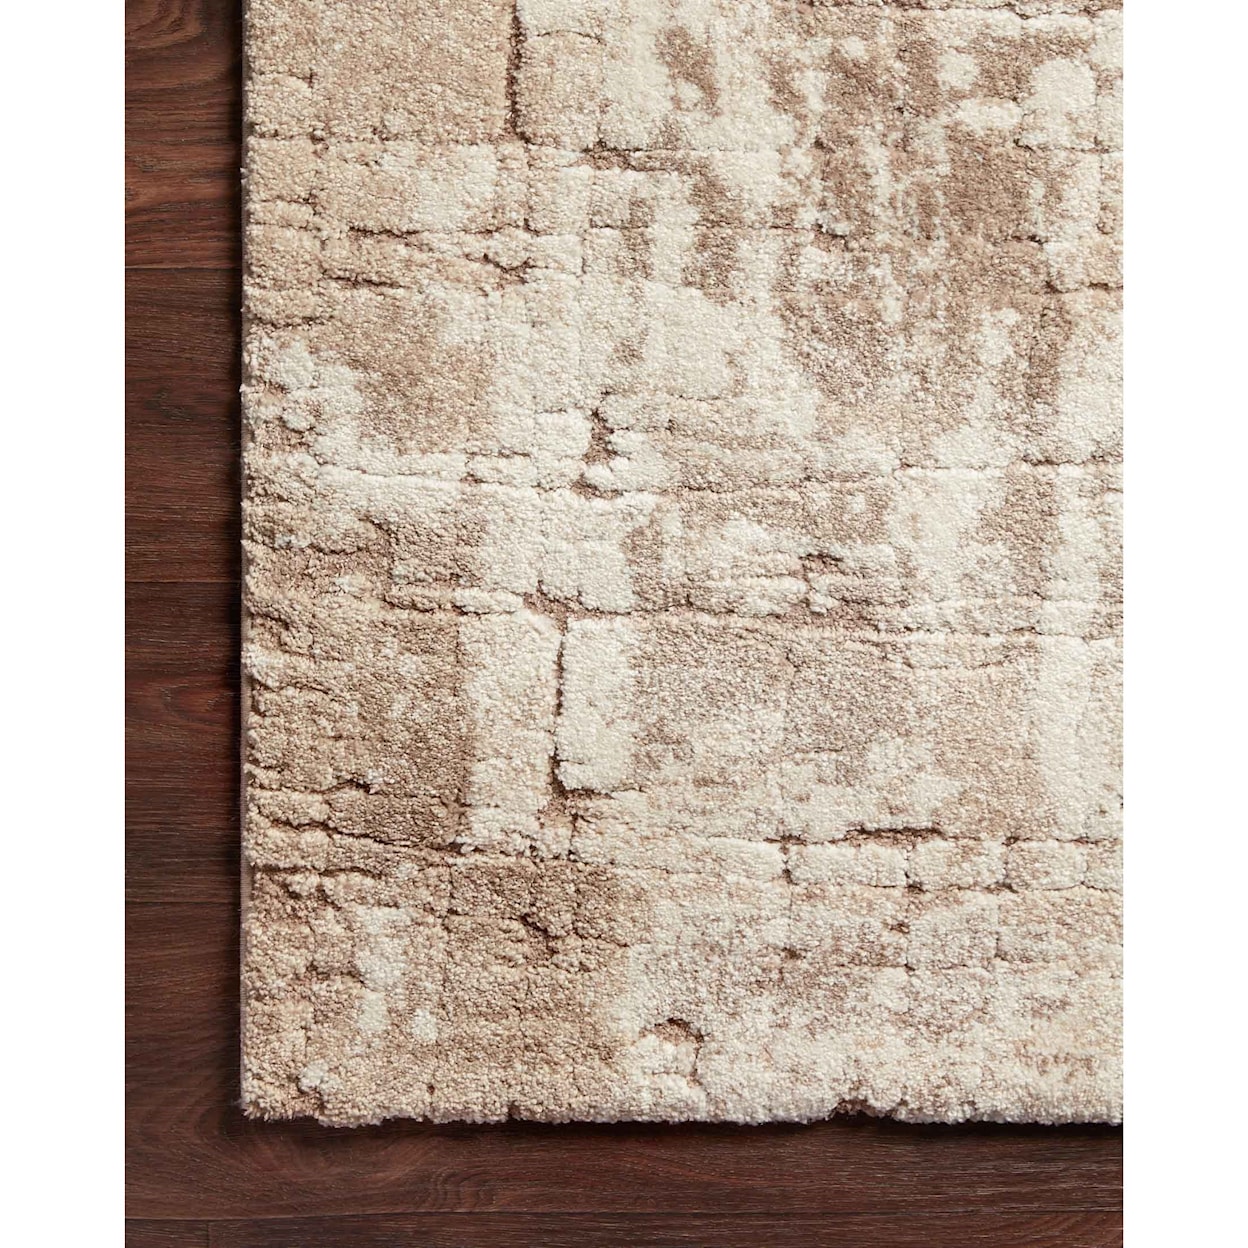 Reeds Rugs Theory 2'7" x 13' Beige / Taupe Rug